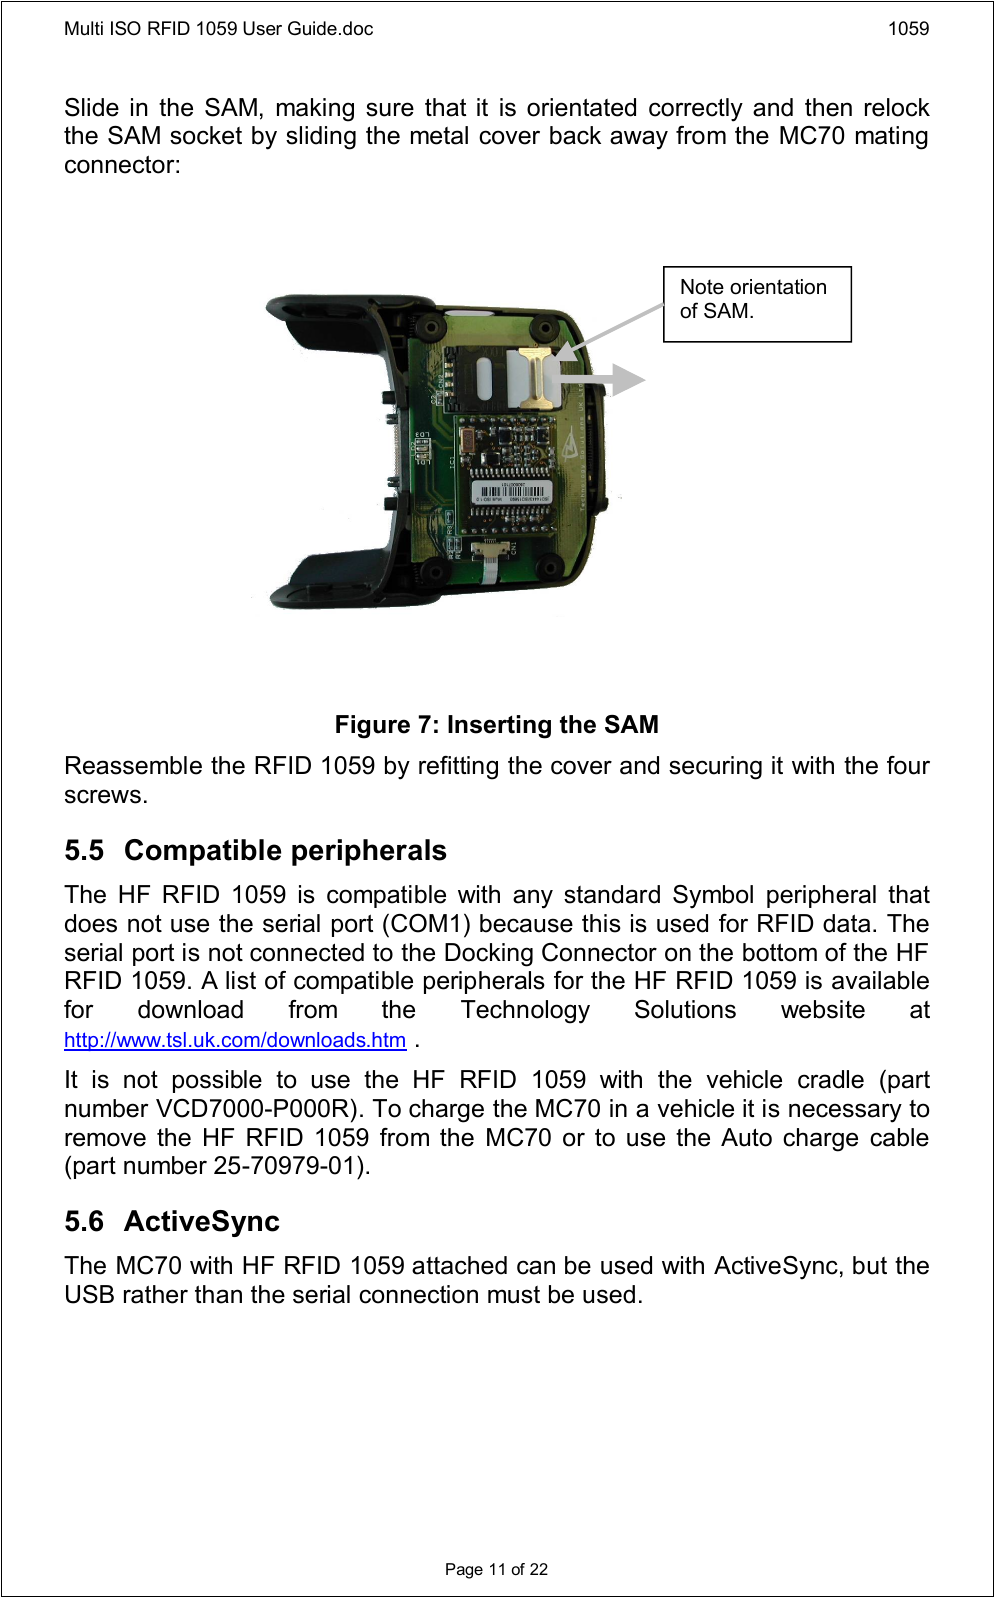 Multi ISO RFID 1059 User Guide.doc 1059Page 11 of 22Slide in the SAM, making sure that it  is orientated correctly and then relock the SAM socket by sliding the metal cover back away from the MC70 mating connector:Figure 7: Inserting the SAMReassemble the RFID 1059 by refitting the cover and securing it with the four screws.5.5 Compatible peripheralsThe  HF  RFID  1059  is  compatible  with  any  standard  Symbol  peripheral  that does not use the serial port (COM1) because this is used for RFID data. The serial port is not connected to the Docking Connector on the bottom of the HF RFID 1059. A list of compatible peripherals for the HF RFID 1059 is available for  download  from  the  Technology  Solutions  website  at http://www.tsl.uk.com/downloads.htm .It  is  not  possible  to  use  the  HF  RFID  1059  with  the  vehicle  cradle  (part number VCD7000-P000R). To charge the MC70 in a vehicle it is necessary to remove  the HF RFID 1059 from the  MC70 or to  use the  Auto charge cable (part number 25-70979-01).5.6 ActiveSyncThe MC70 with HF RFID 1059 attached can be used with ActiveSync, but the USB rather than the serial connection must be used.Note orientation of SAM.